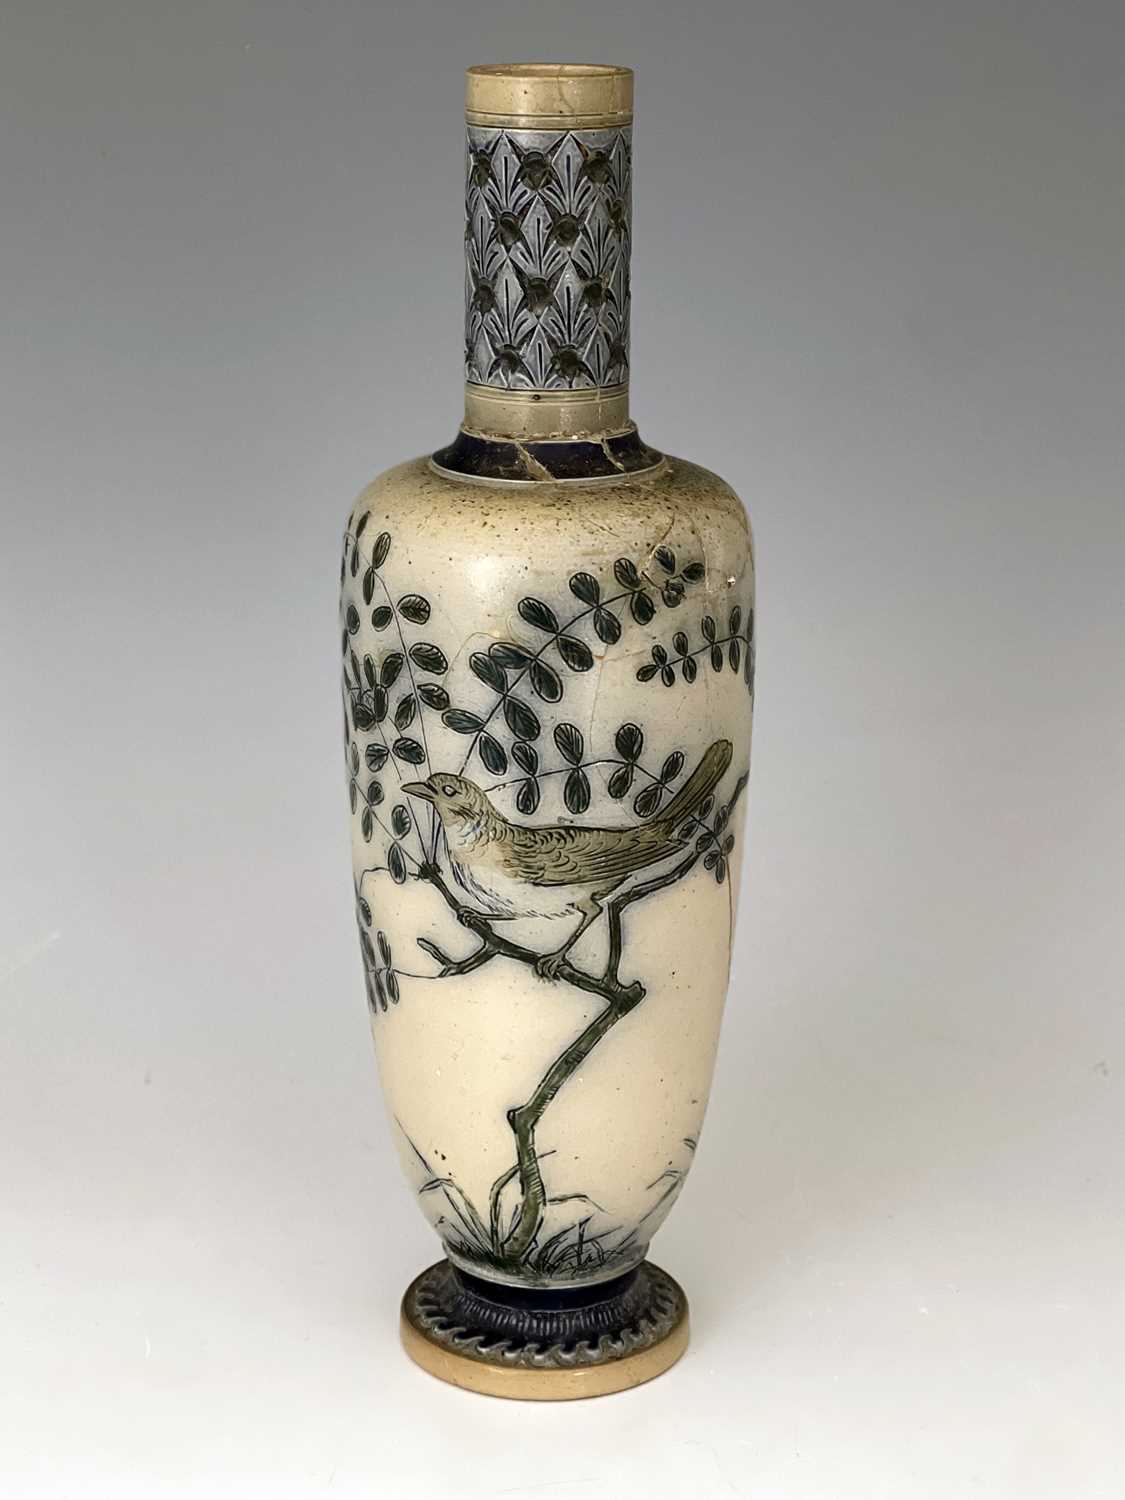 Edwin Martin for Martin Brothers, a stoneware vase, 1879, shouldered and footed form with